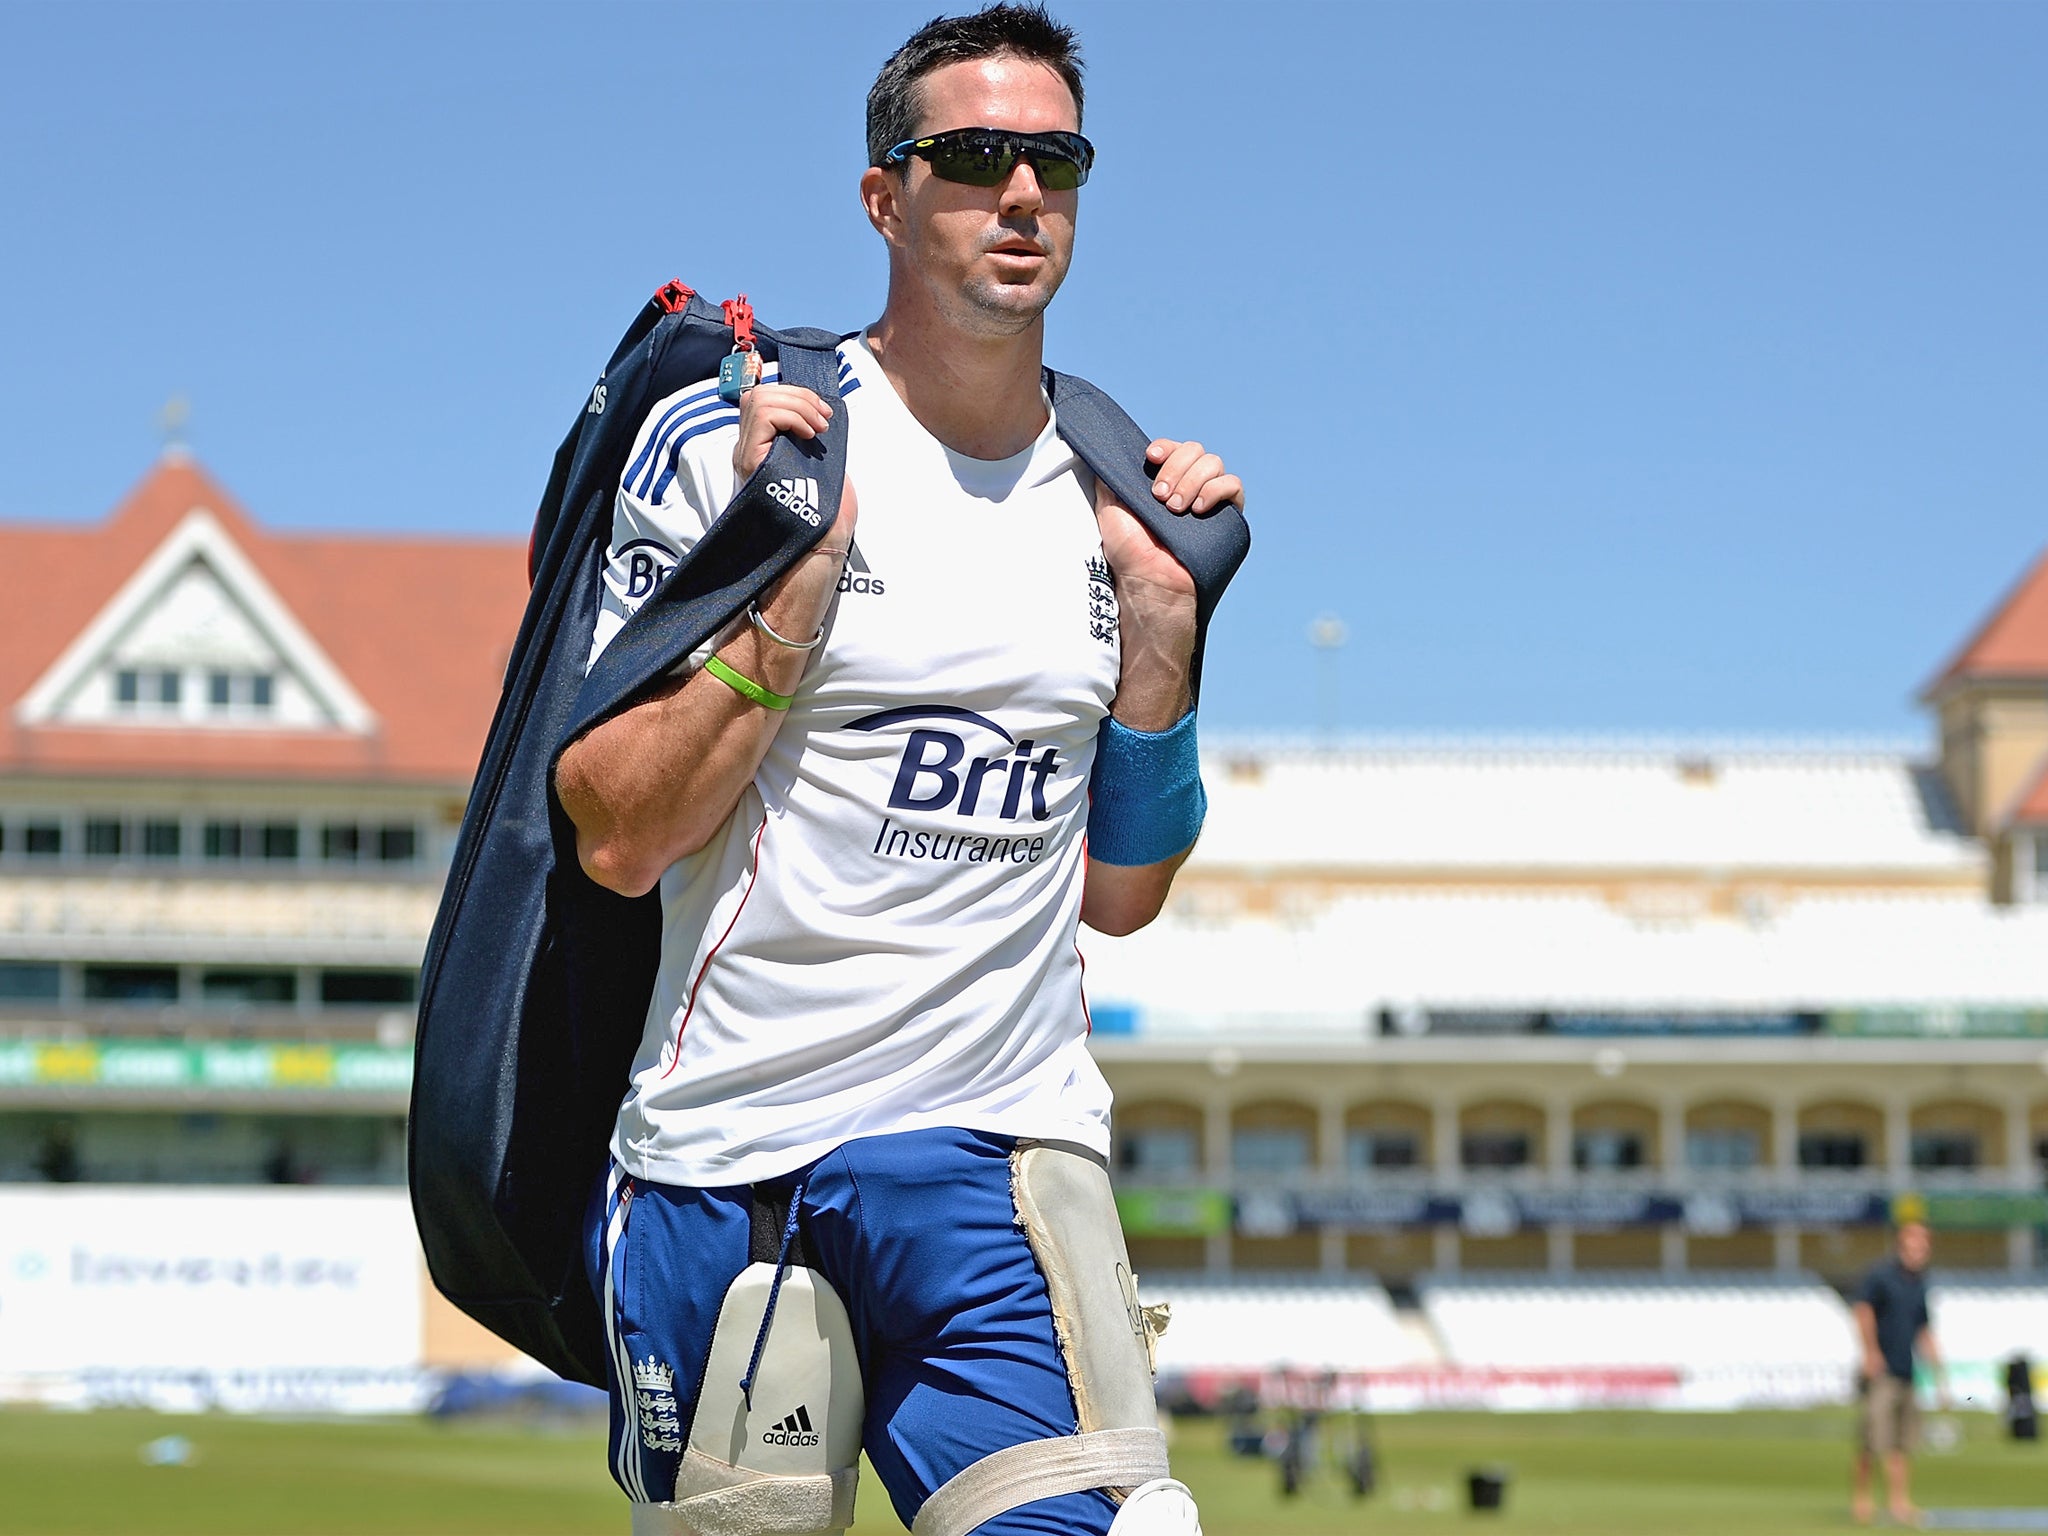 Kevin Pietersen said recently he wants to score 10,000 Test runs